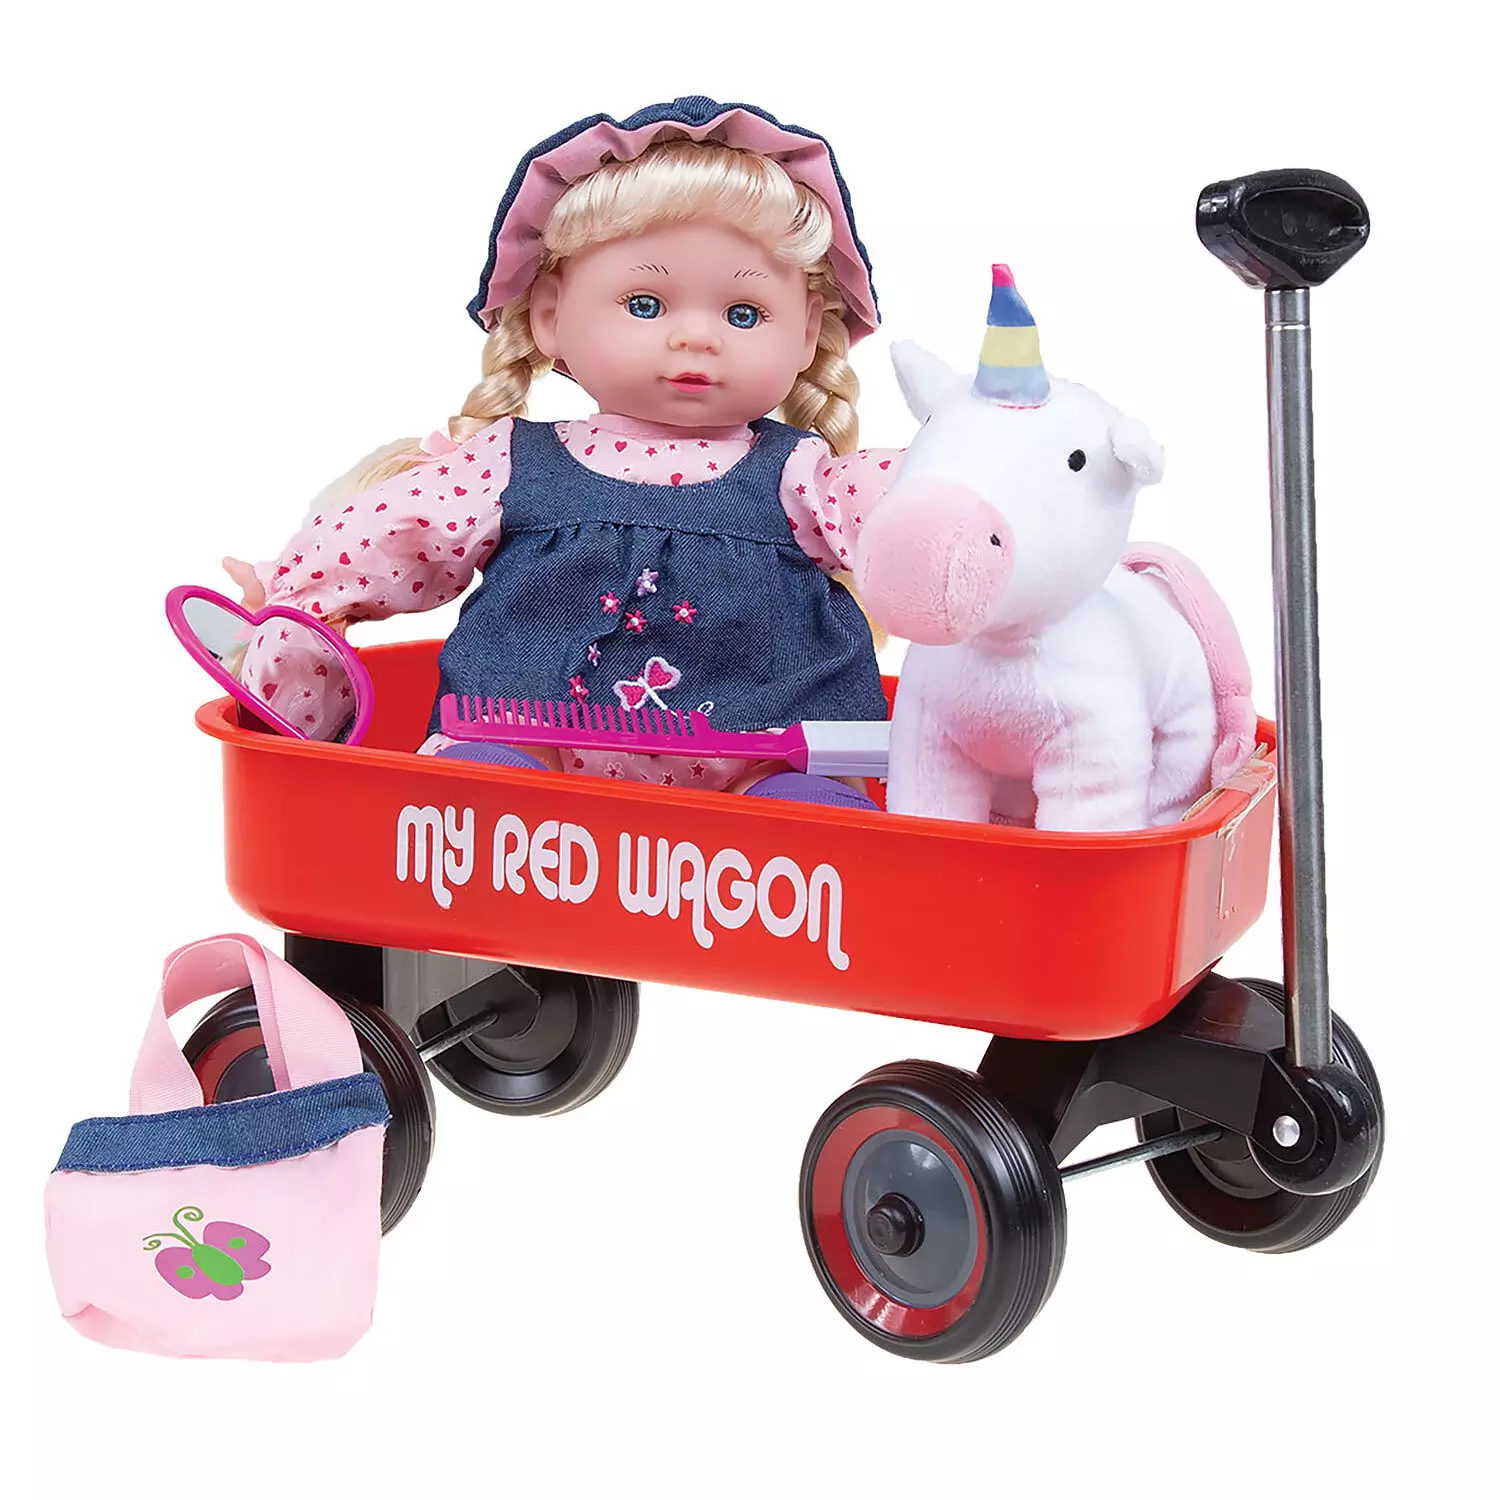 Two of us in the wagon, doll and unicorn with red wagon and accessories set